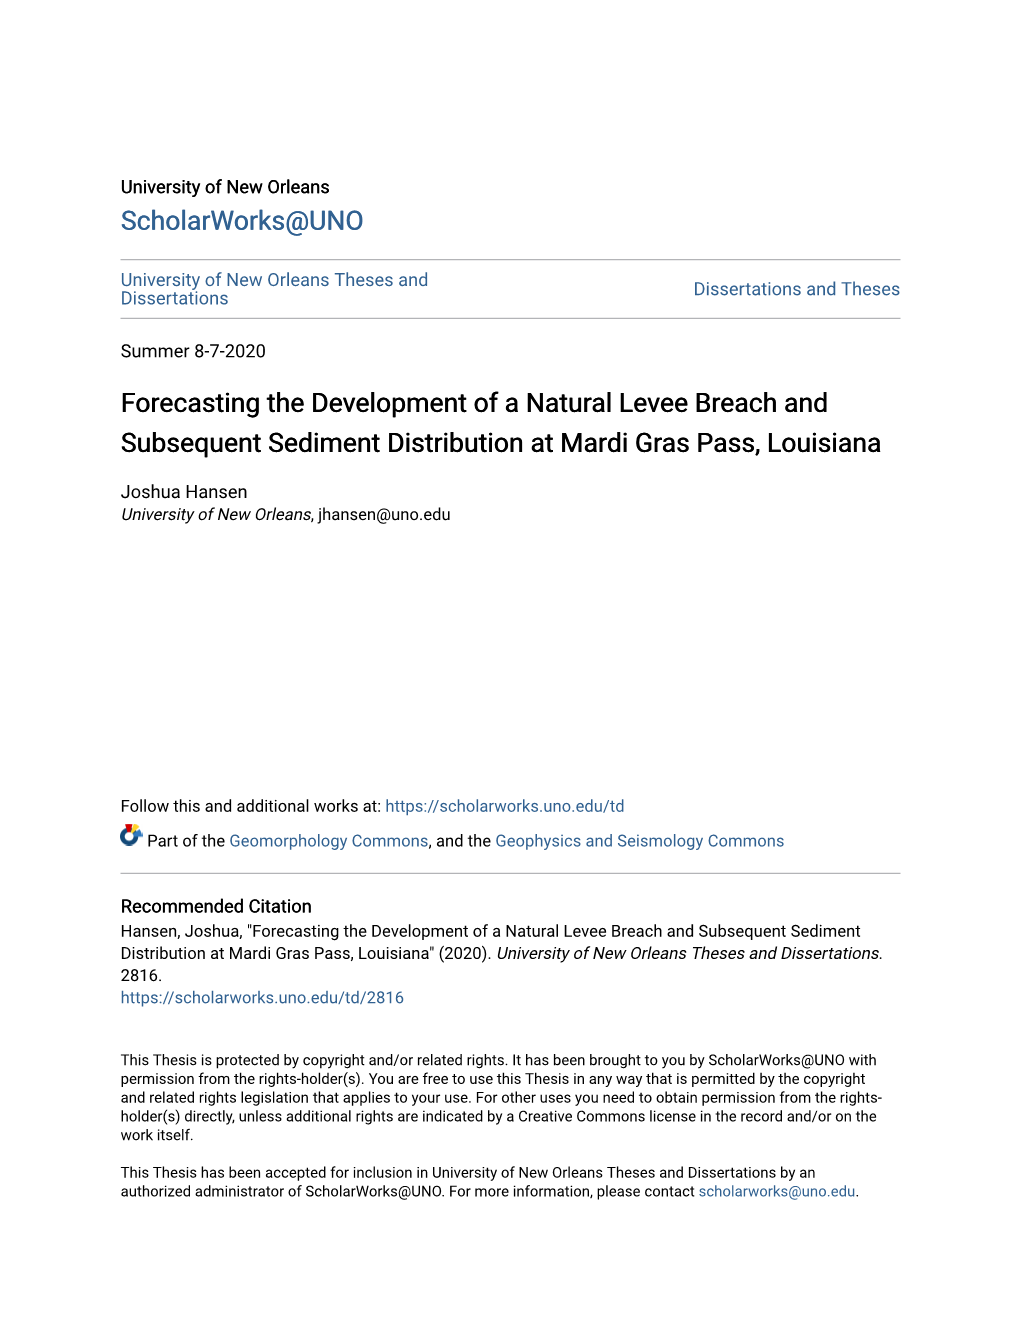 Forecasting the Development of a Natural Levee Breach and Subsequent Sediment Distribution at Mardi Gras Pass, Louisiana